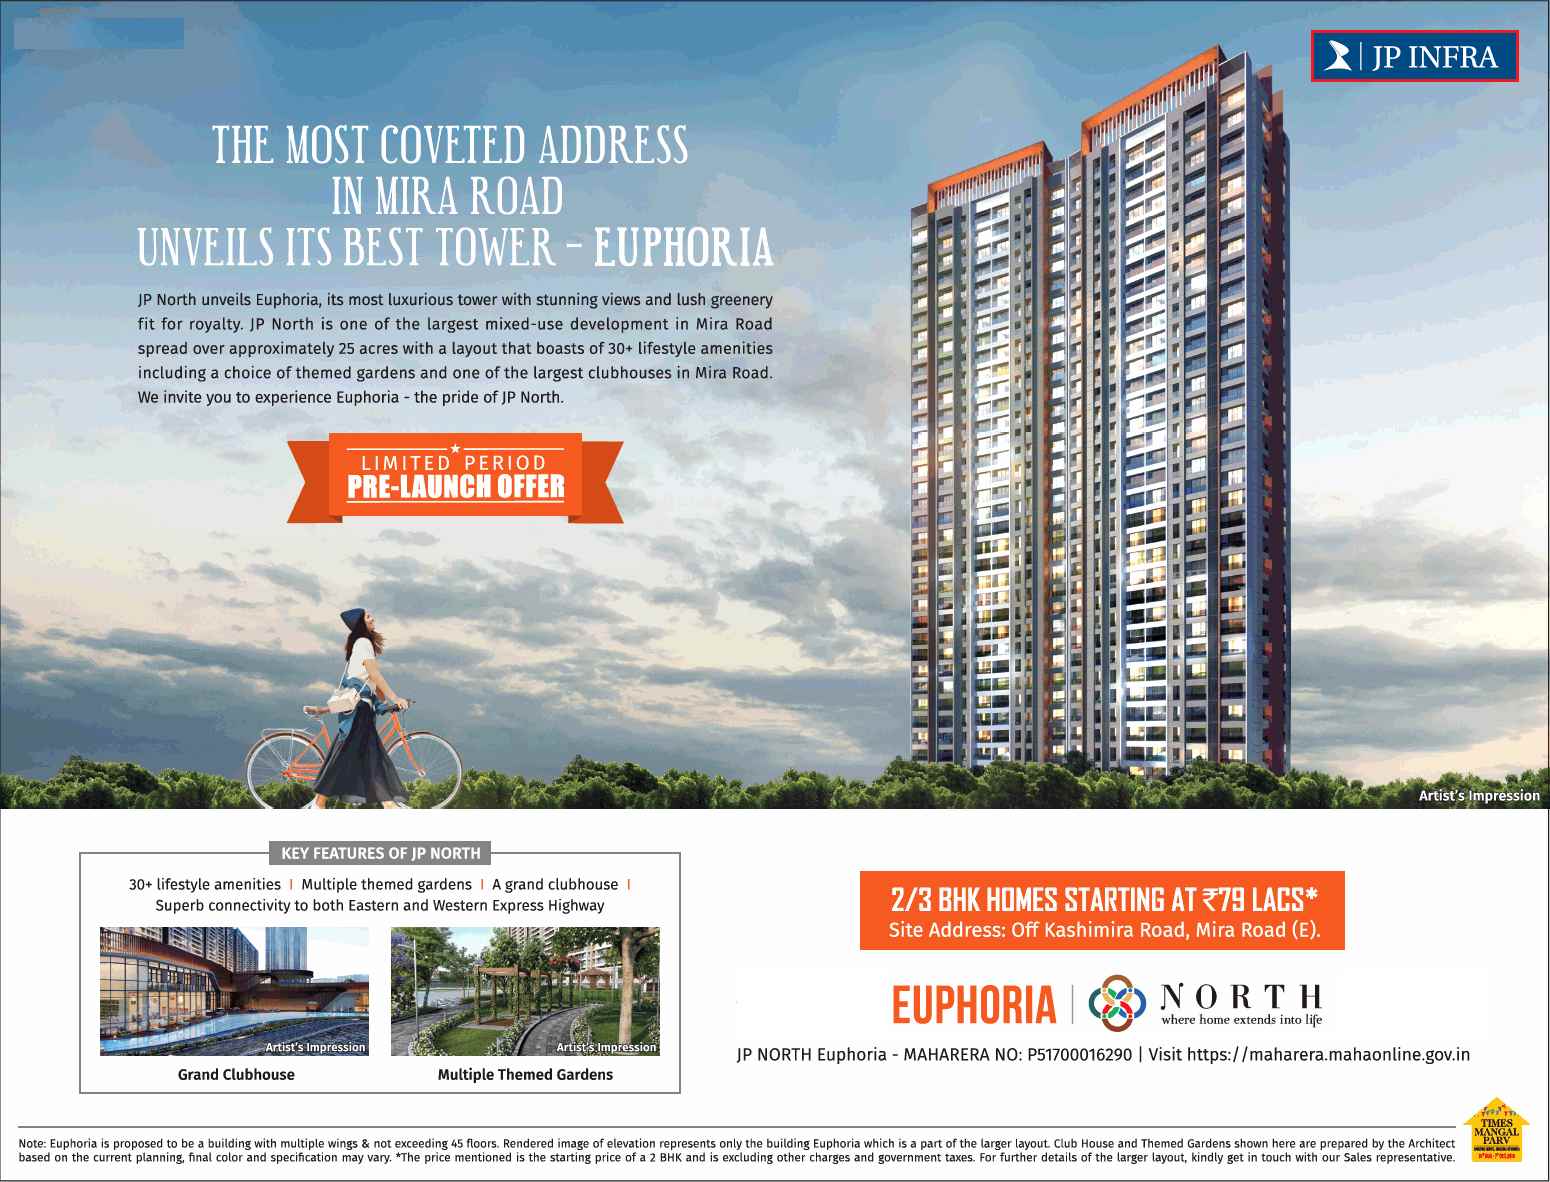 Avail the Pre-Launch offer at JP North Euphoria in Mumbai